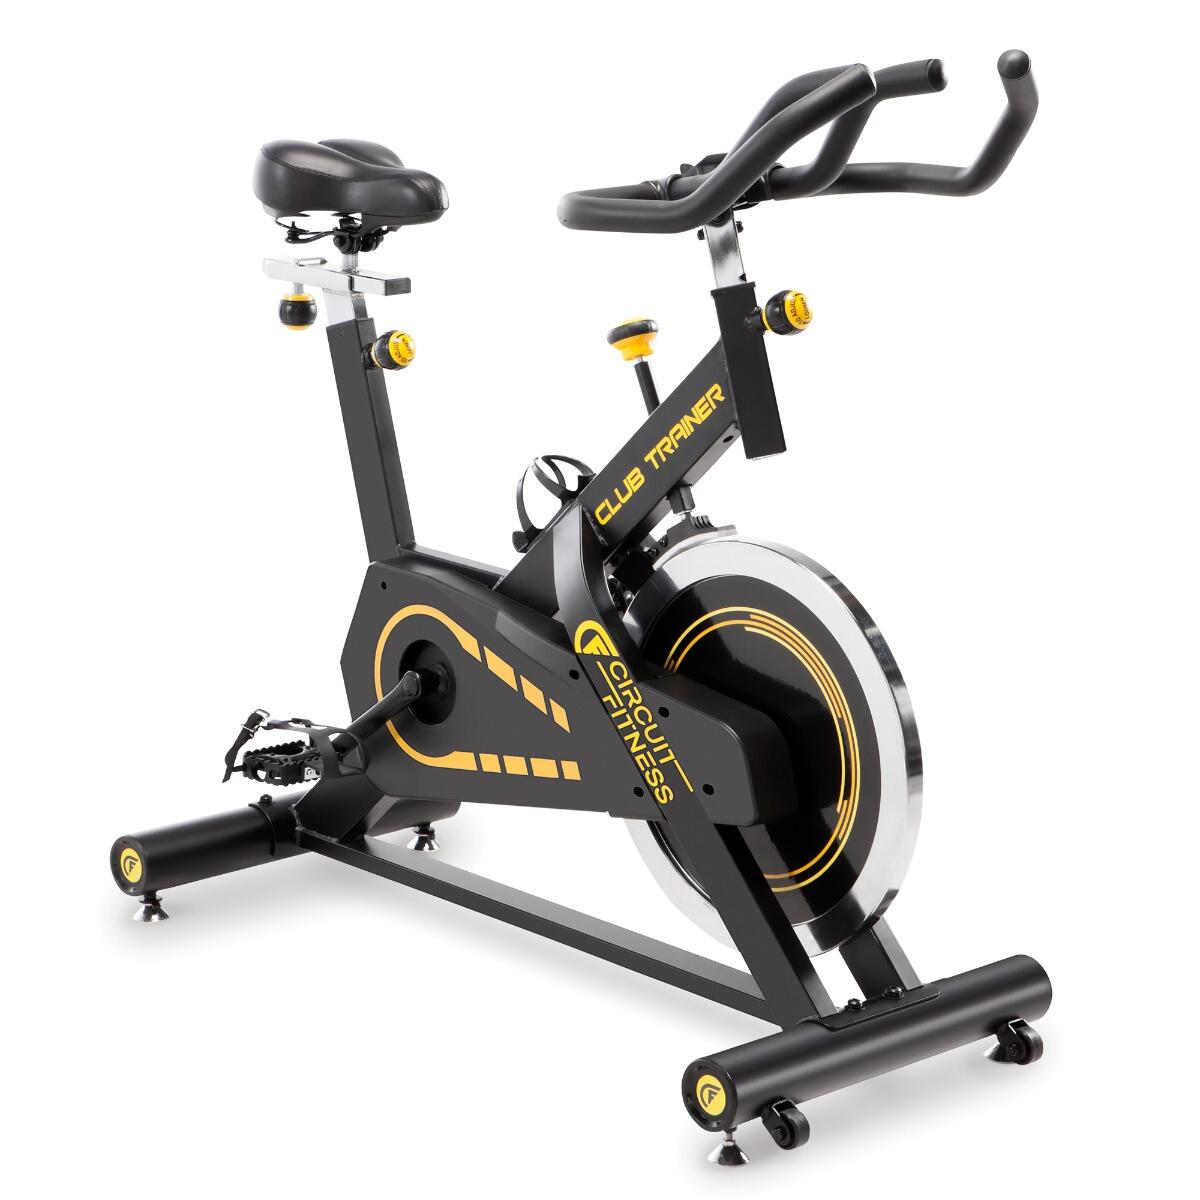 CIRCUIT FITNESS AMZ-955BK DELUXE CLUB REVOLUTION SPIN CYCLE YELLOW 1/7